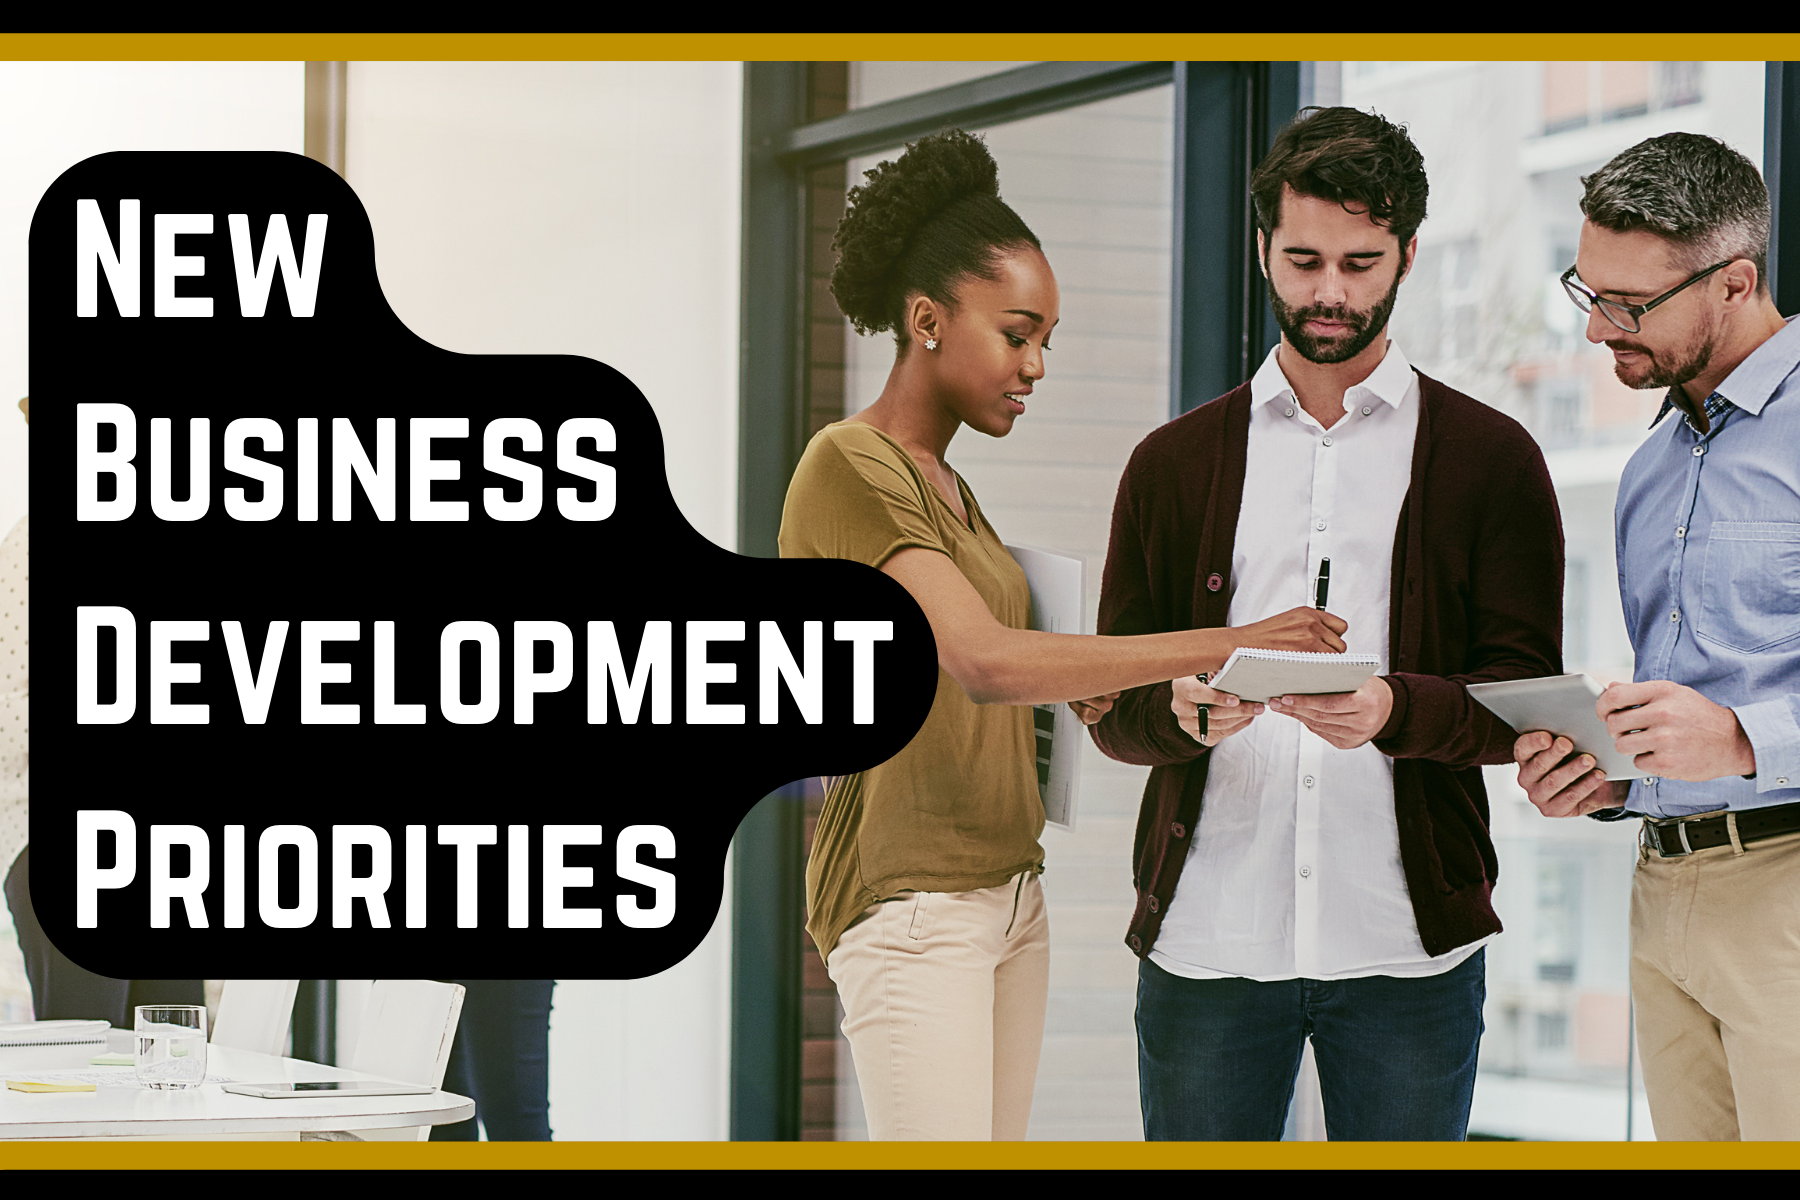 11 New Business Development Priorities for Small Business Sales Teams